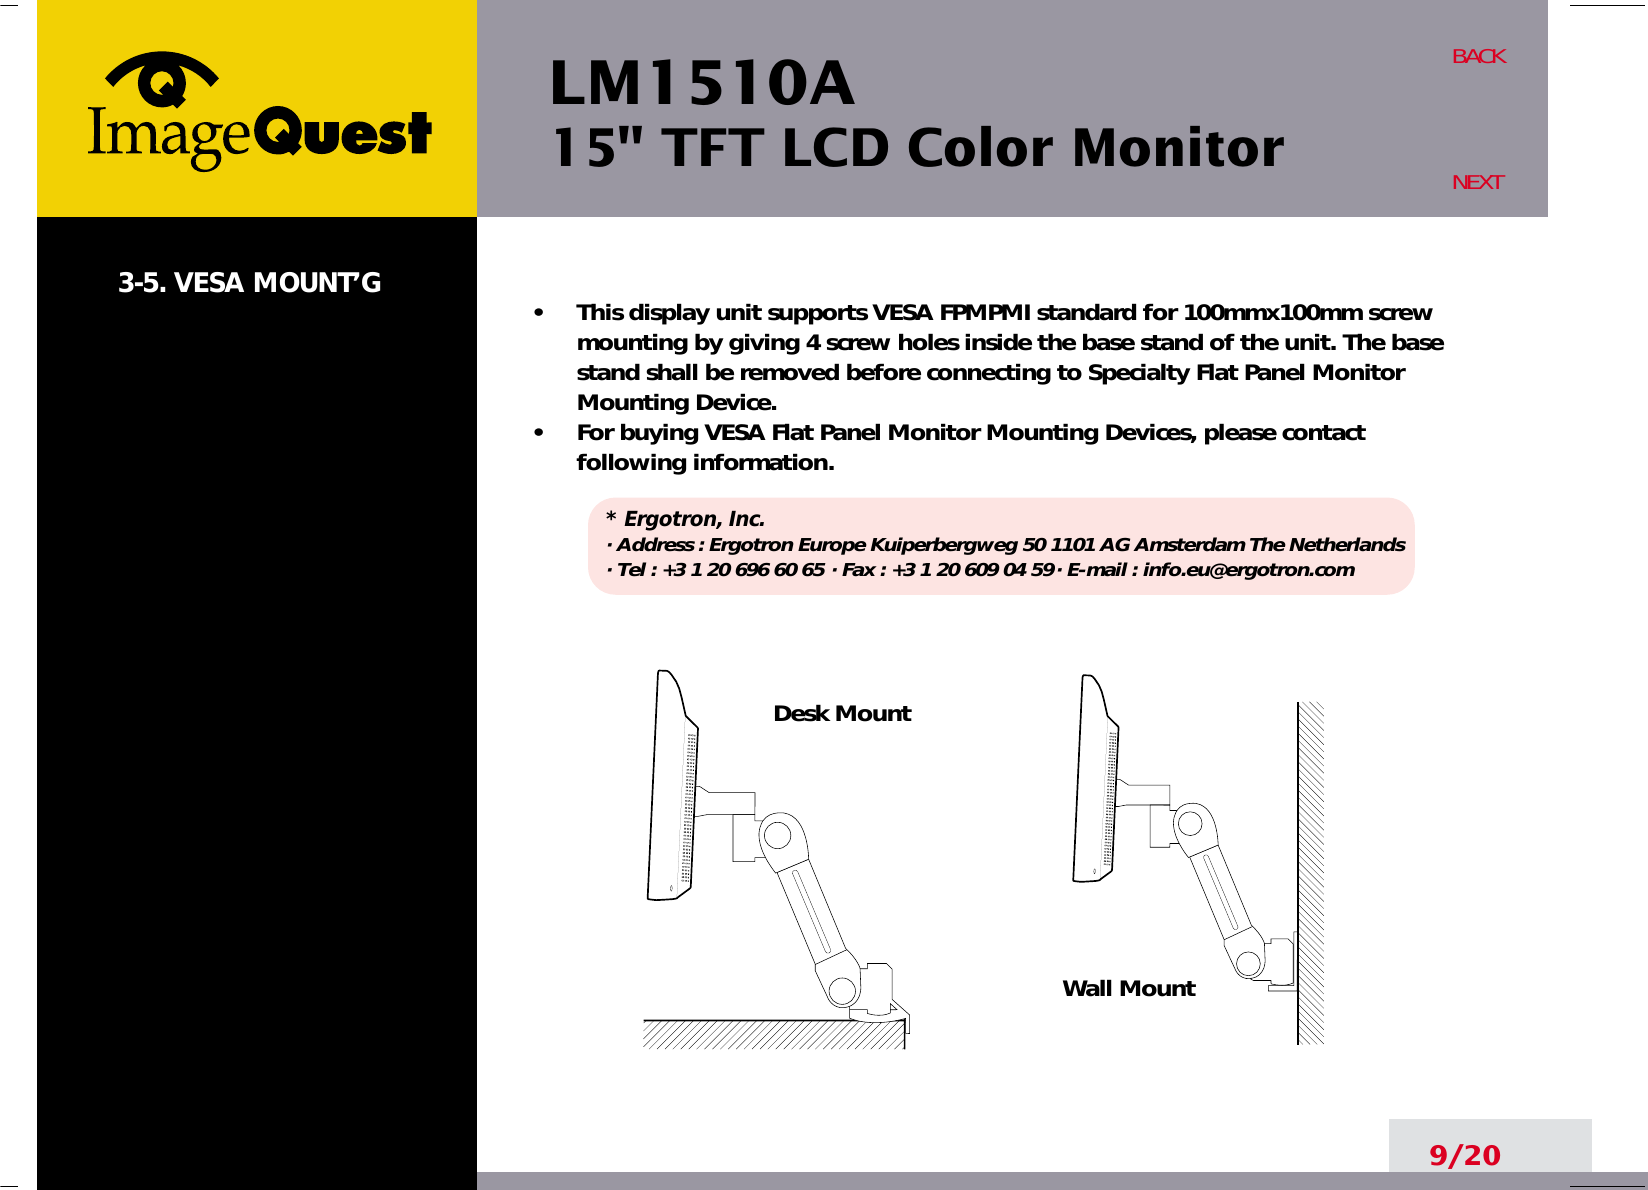 LM1510A15&quot; TFT LCD Color Monitor9/20BACKNEXT3-5. VESA MOUNT’G •     This display unit supports VESA FPMPMI standard for 100mmx100mm screwmounting by giving 4 screw holes inside the base stand of the unit. The basestand shall be removed before connecting to Specialty Flat Panel MonitorMounting Device.•     For buying VESA Flat Panel Monitor Mounting Devices, please contactfollowing information.* Ergotron, Inc.· Address : Ergotron Europe Kuiperbergweg 50 1101 AG Amsterdam The Netherlands· Tel : +3 1 20 696 60 65 · Fax : +3 1 20 609 04 59· E-mail : info.eu@ergotron.comDesk MountWall Mount